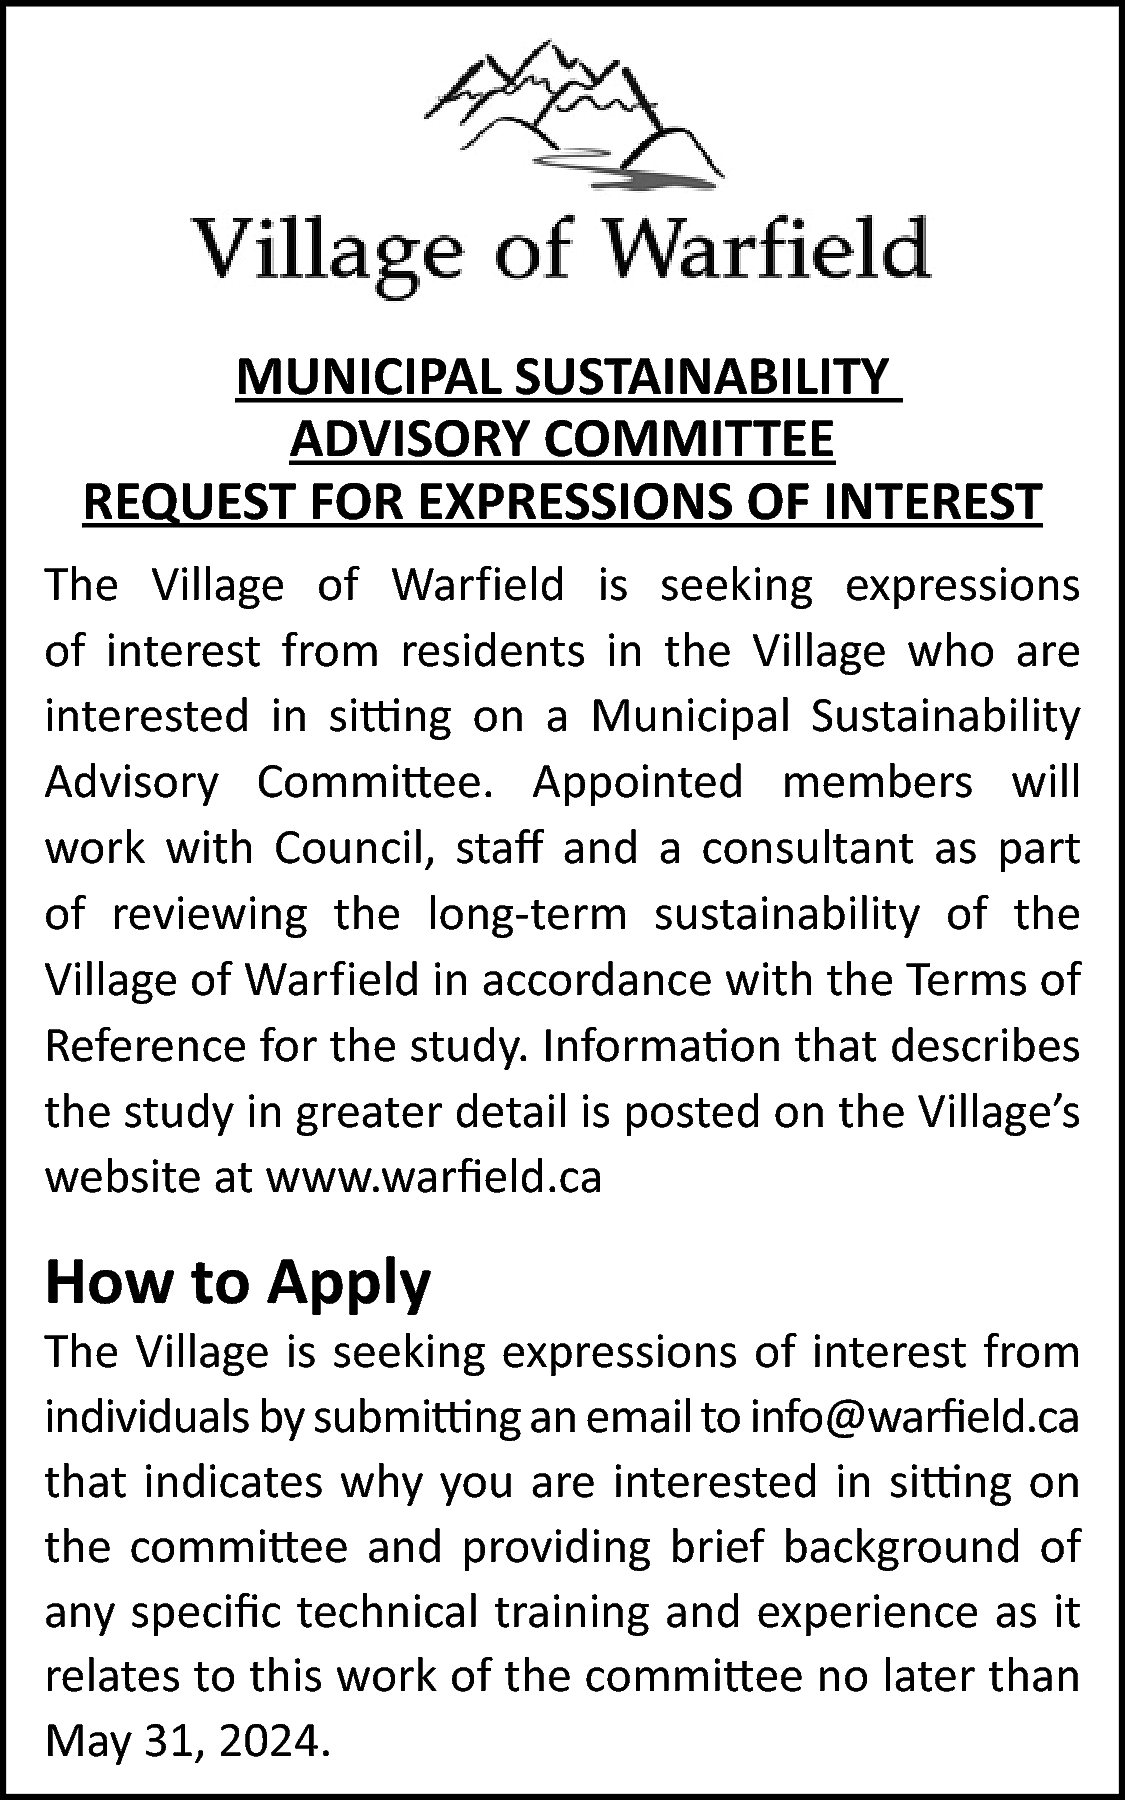 MUNICIPAL SUSTAINABILITY <br>ADVISORY COMMITTEE <br>REQUEST  MUNICIPAL SUSTAINABILITY  ADVISORY COMMITTEE  REQUEST FOR EXPRESSIONS OF INTEREST  The Village of Warfield is seeking expressions  of interest from residents in the Village who are  interested in sitting on a Municipal Sustainability  Advisory Committee. Appointed members will  work with Council, staff and a consultant as part  of reviewing the long-term sustainability of the  Village of Warfield in accordance with the Terms of  Reference for the study. Information that describes  the study in greater detail is posted on the Village’s  website at www.warfield.ca    How to Apply    The Village is seeking expressions of interest from  individuals by submitting an email to info@warfield.ca  that indicates why you are interested in sitting on  the committee and providing brief background of  any specific technical training and experience as it  relates to this work of the committee no later than  May 31, 2024.    